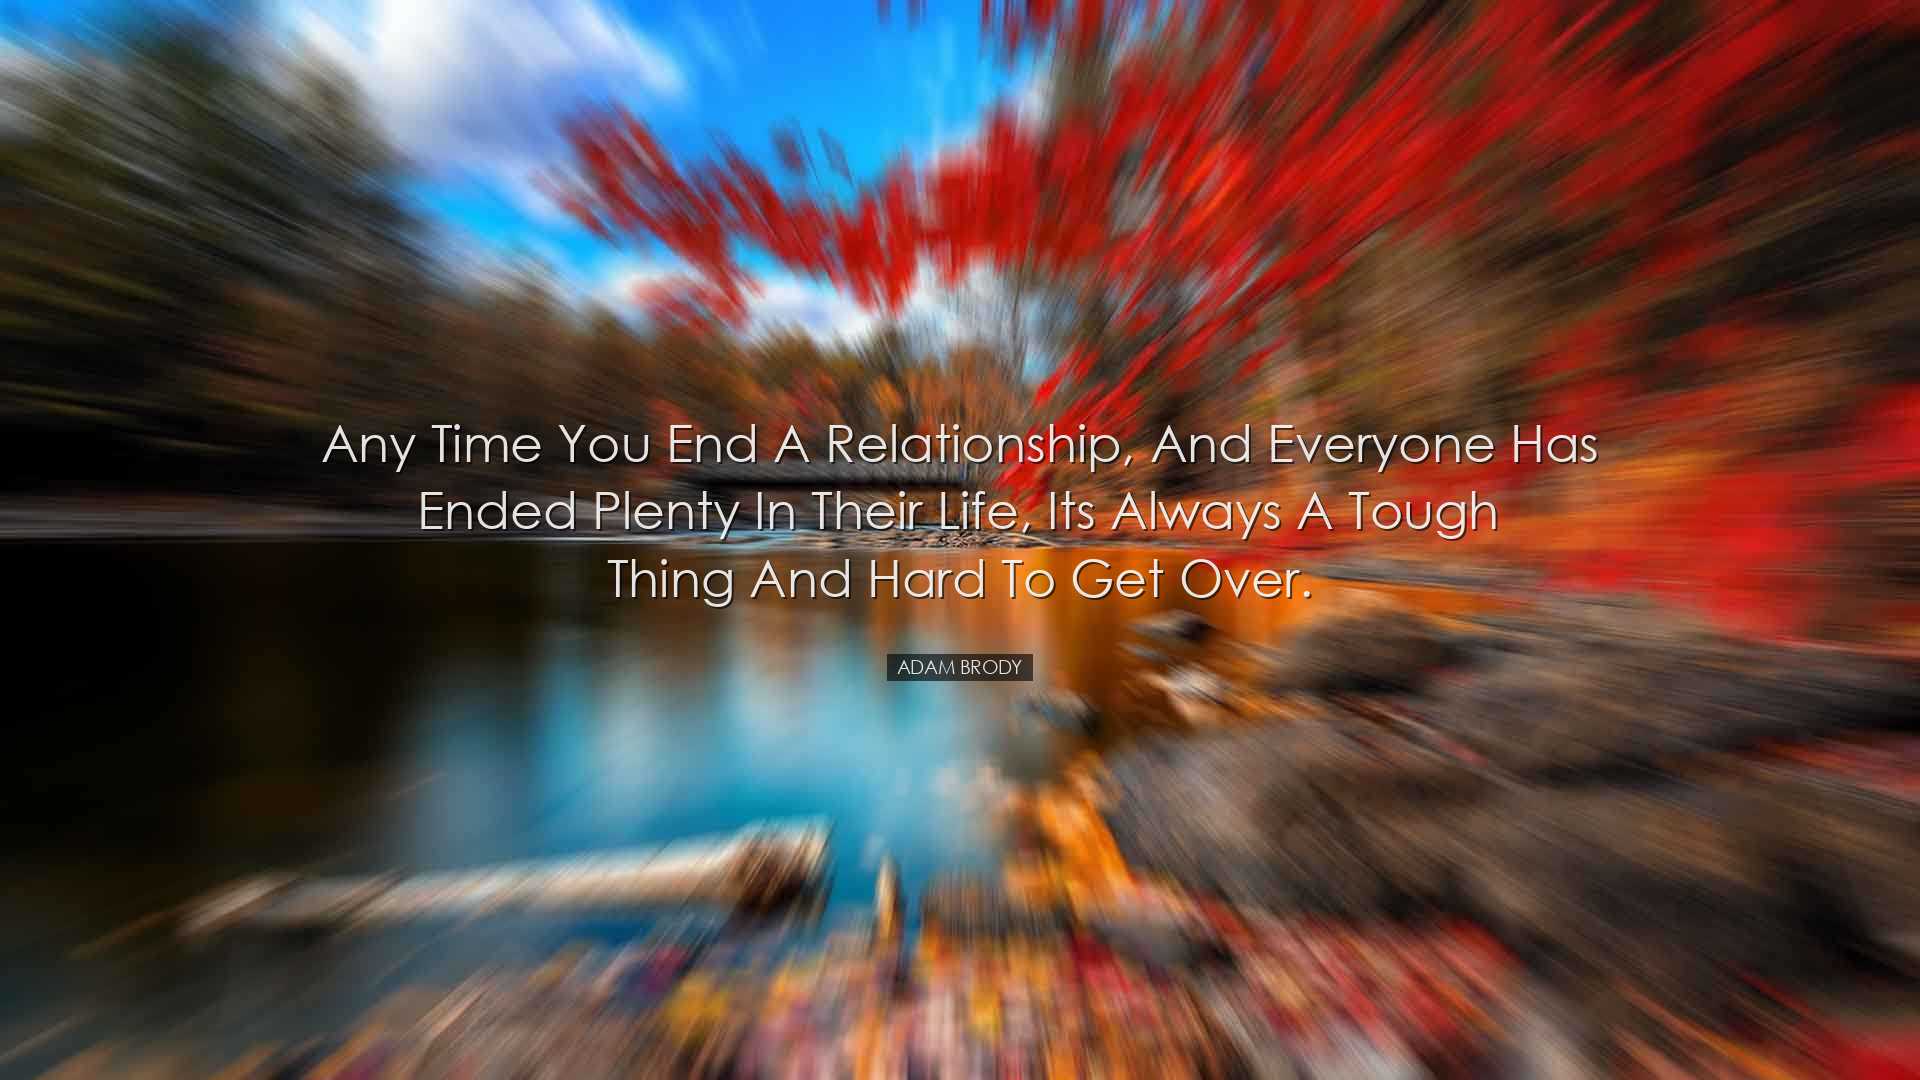 Any time you end a relationship, and everyone has ended plenty in